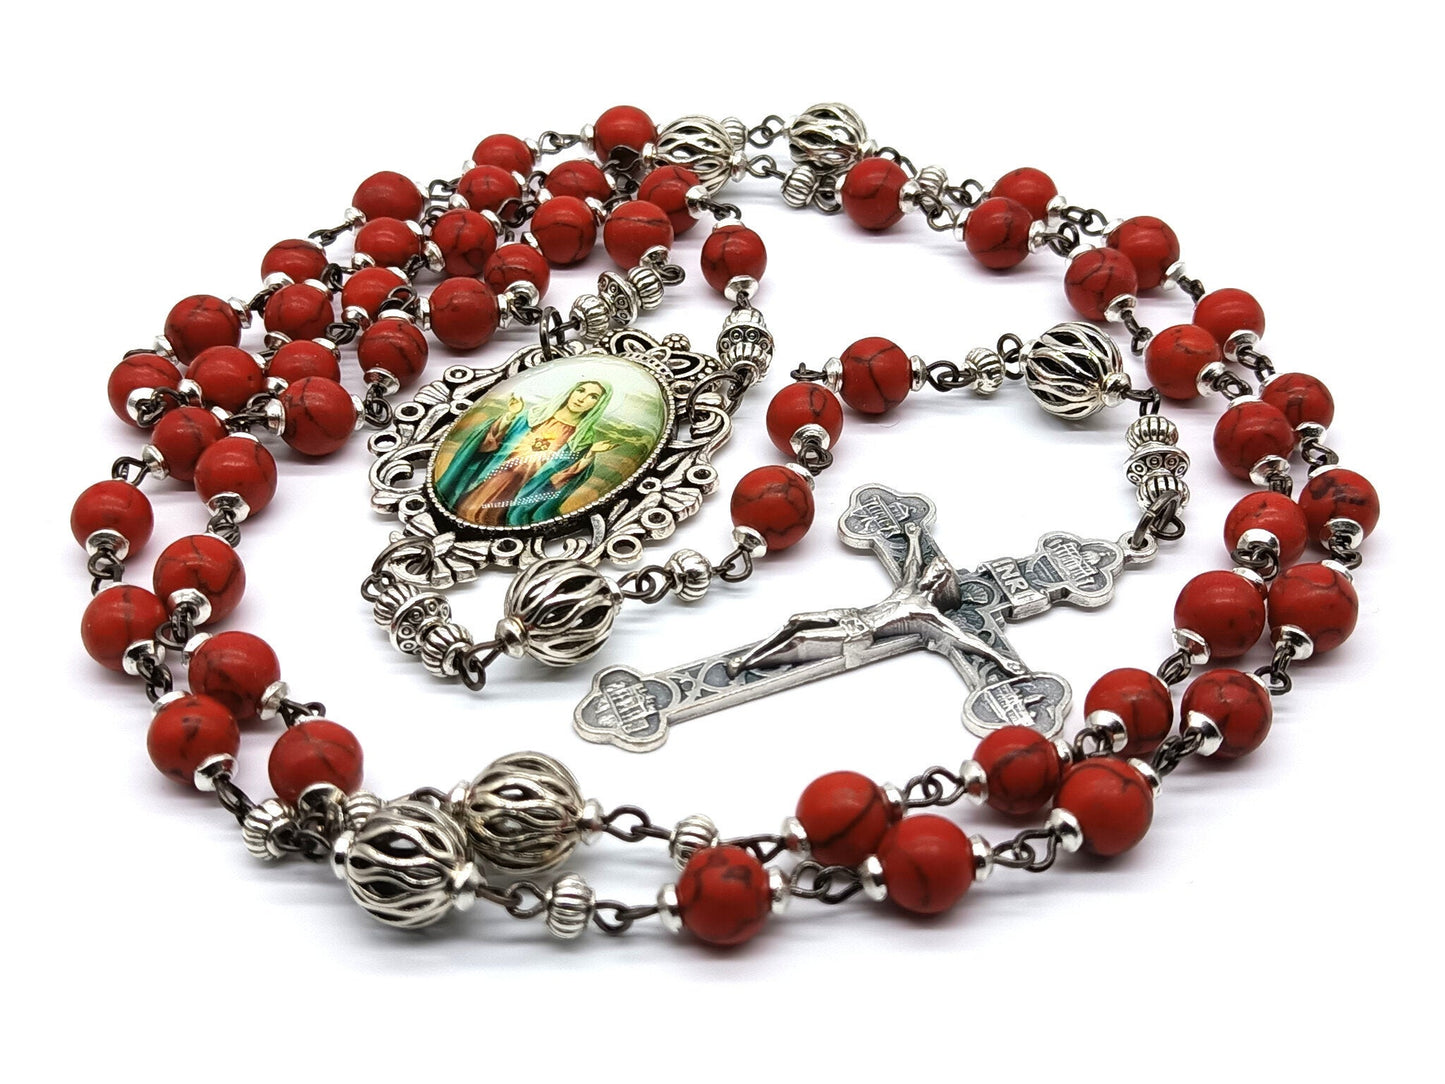 Immaculate Heart unique rosary beads with red gemstone beads, silver lattice pater beads, Four Basilicas crucifix and Our Lady picture centre medal.